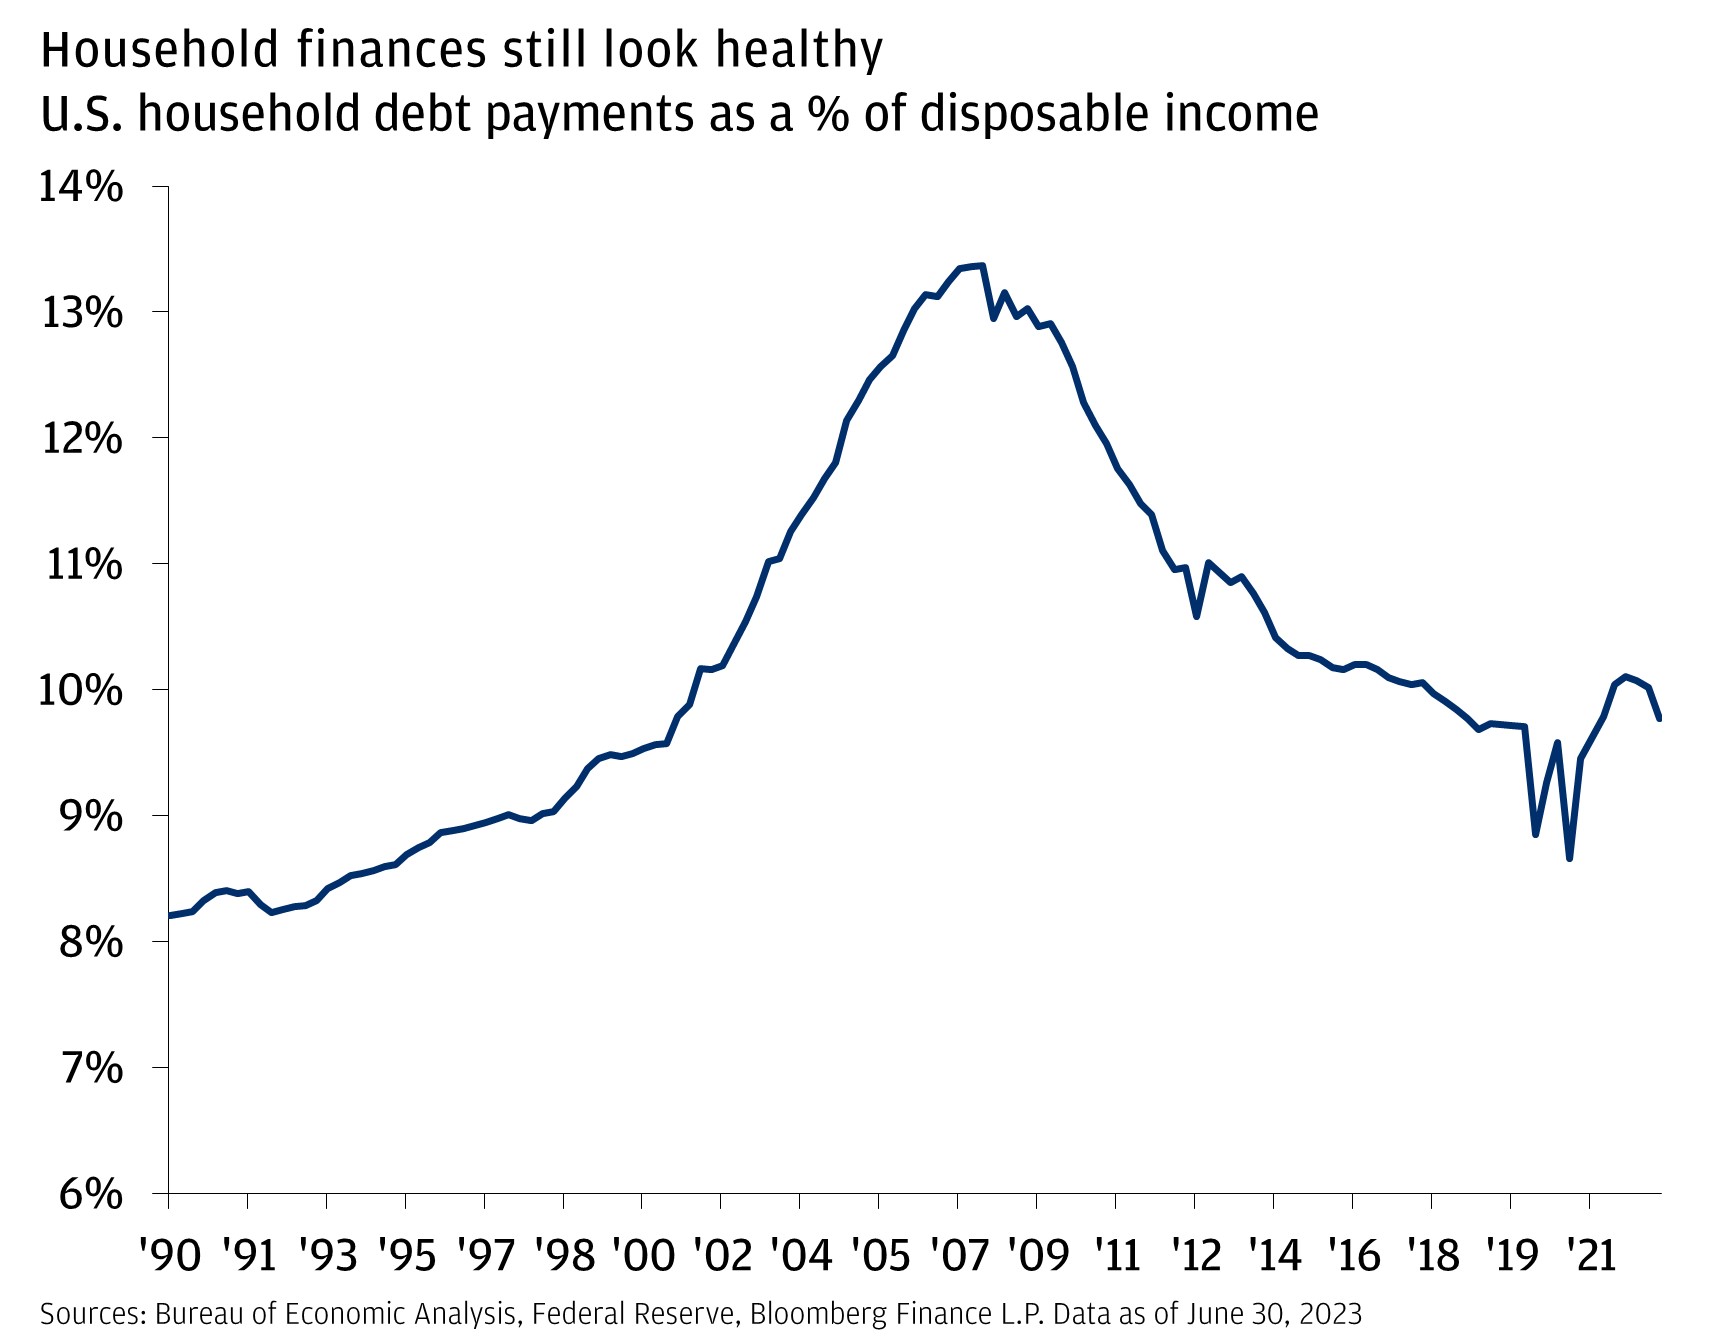 The chart describes the U.S. household debt payments as a % of disposable income. 	The first data point came in at 8.22% in Q2 1990. 	It went all the way up to hit the peak at 13.36% in Q4 2007. 	It then went all the way down and declined to 8.66% in Q1 2021.  	Then it ticked up and the last data point came in at 9.77% in Q1 2023.